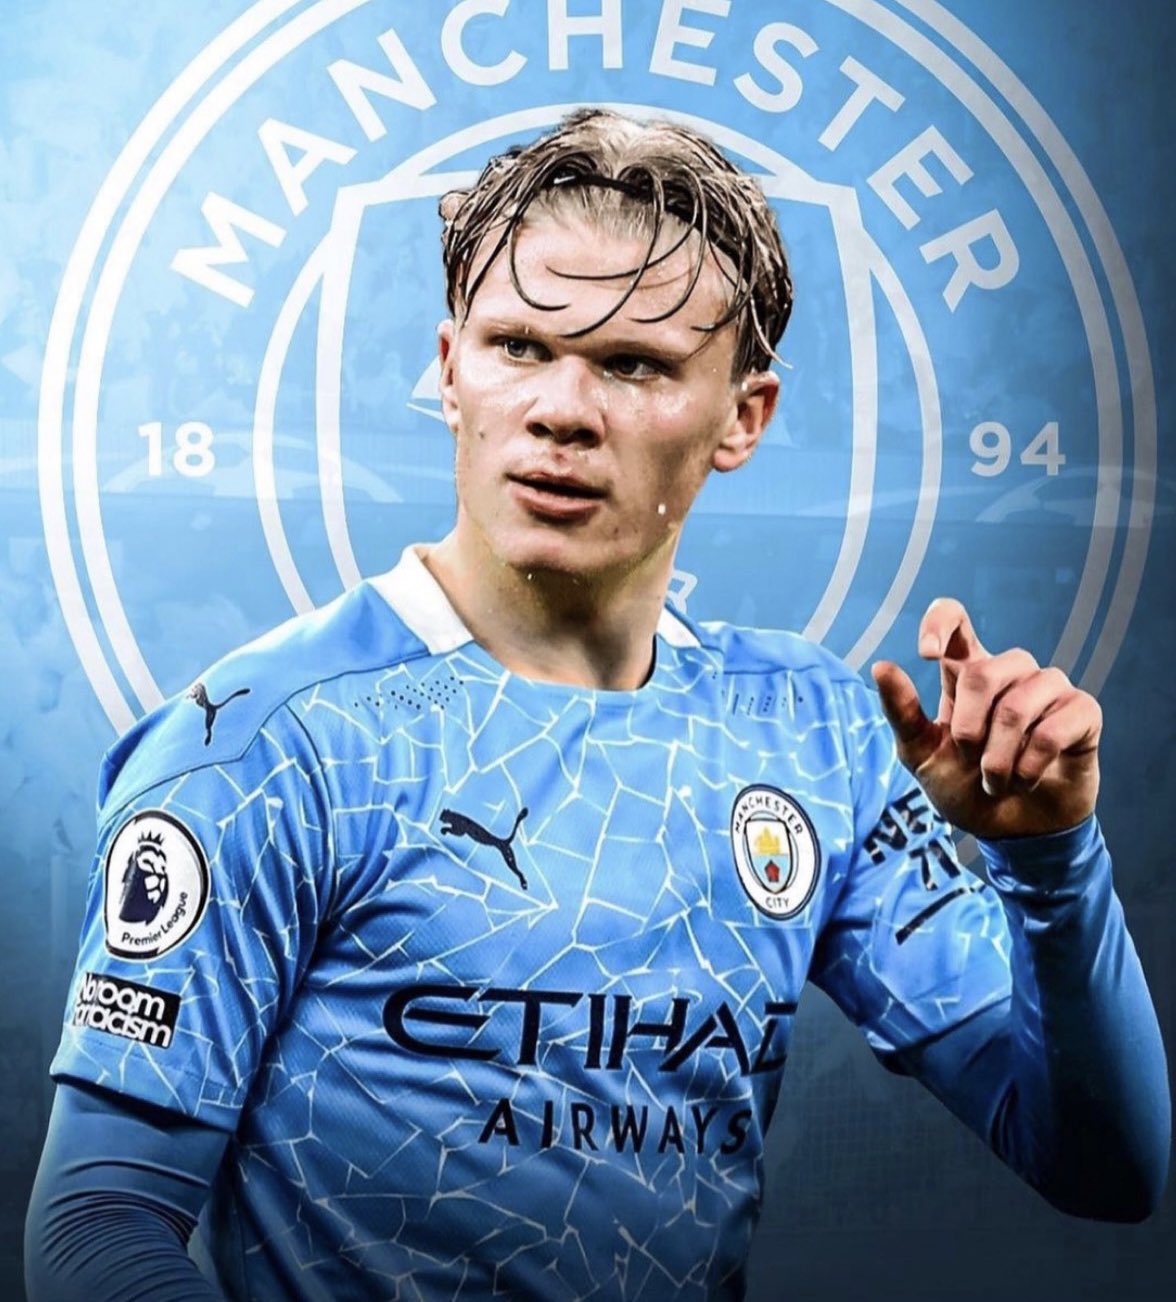 City Xtra #ManCity Are 'eager' To Sign Erling Haaland As Sergio Aguero's Long Time Successor, Even If The Club Face Competition From Real Madrid, Chelsea And Manchester United For The Player's